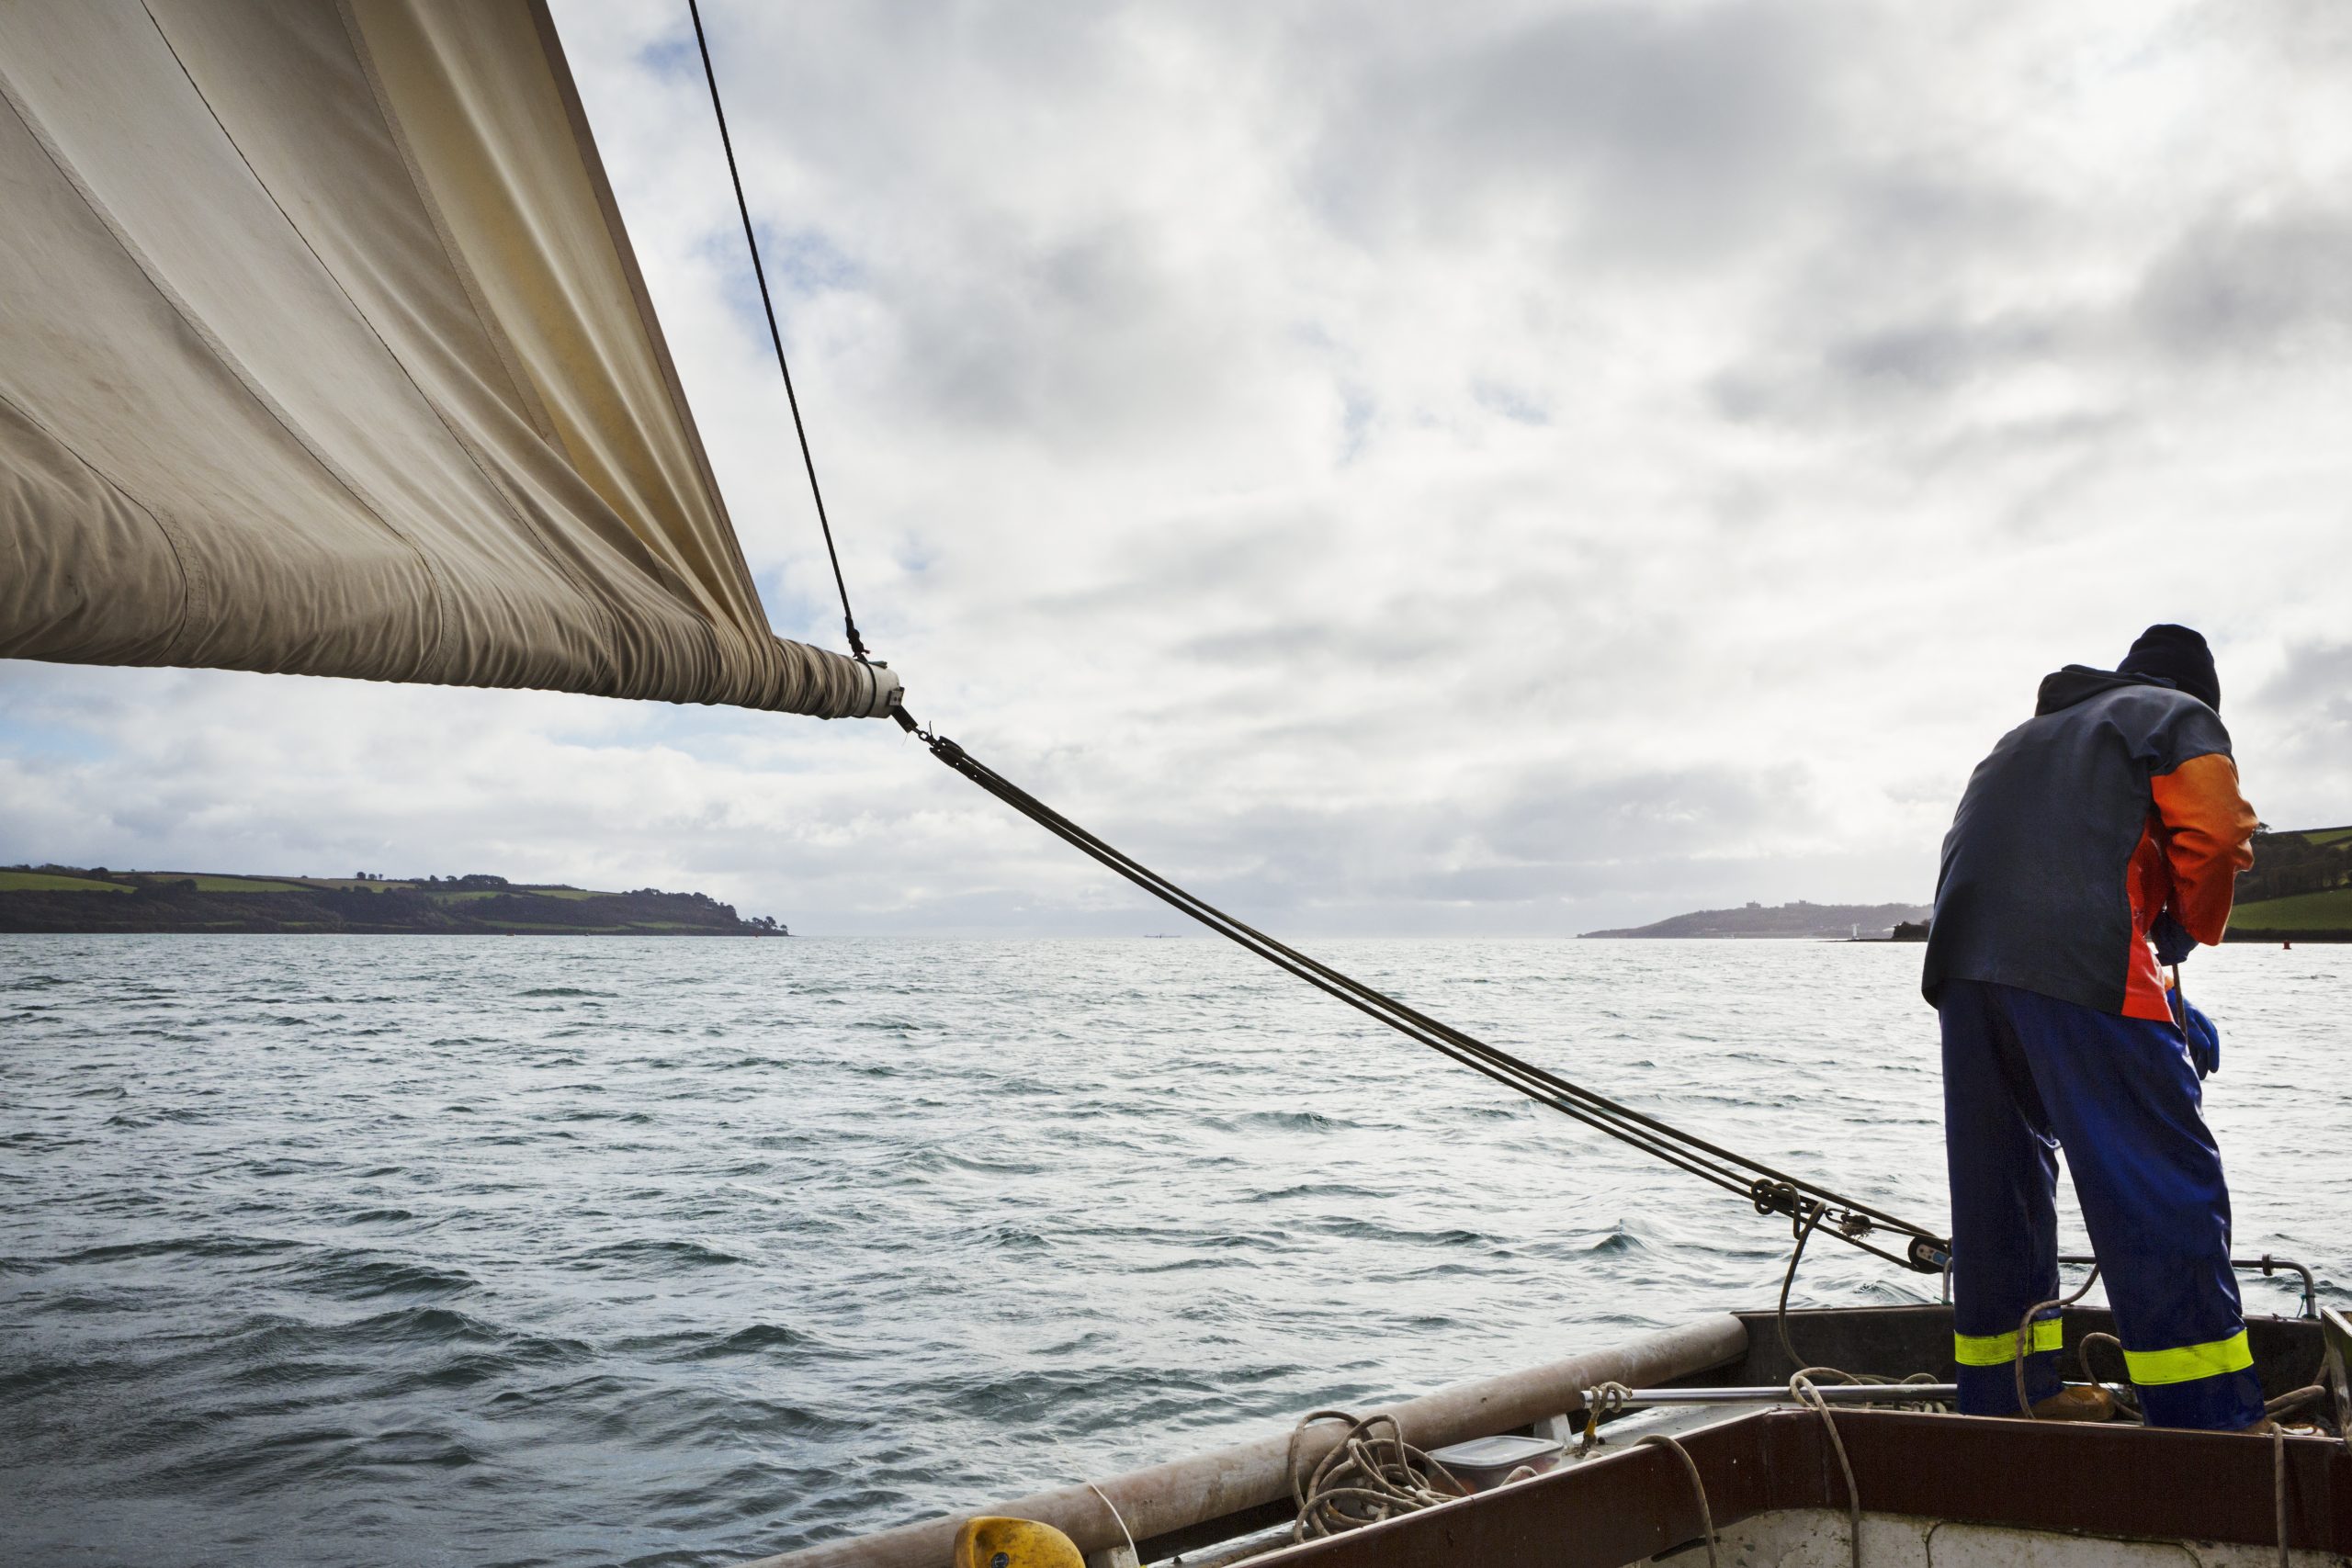 Traditional Sustainable Oyster Fishing, a fisherman on a sailing boat in the Fal Estuary. ,River Fal,England